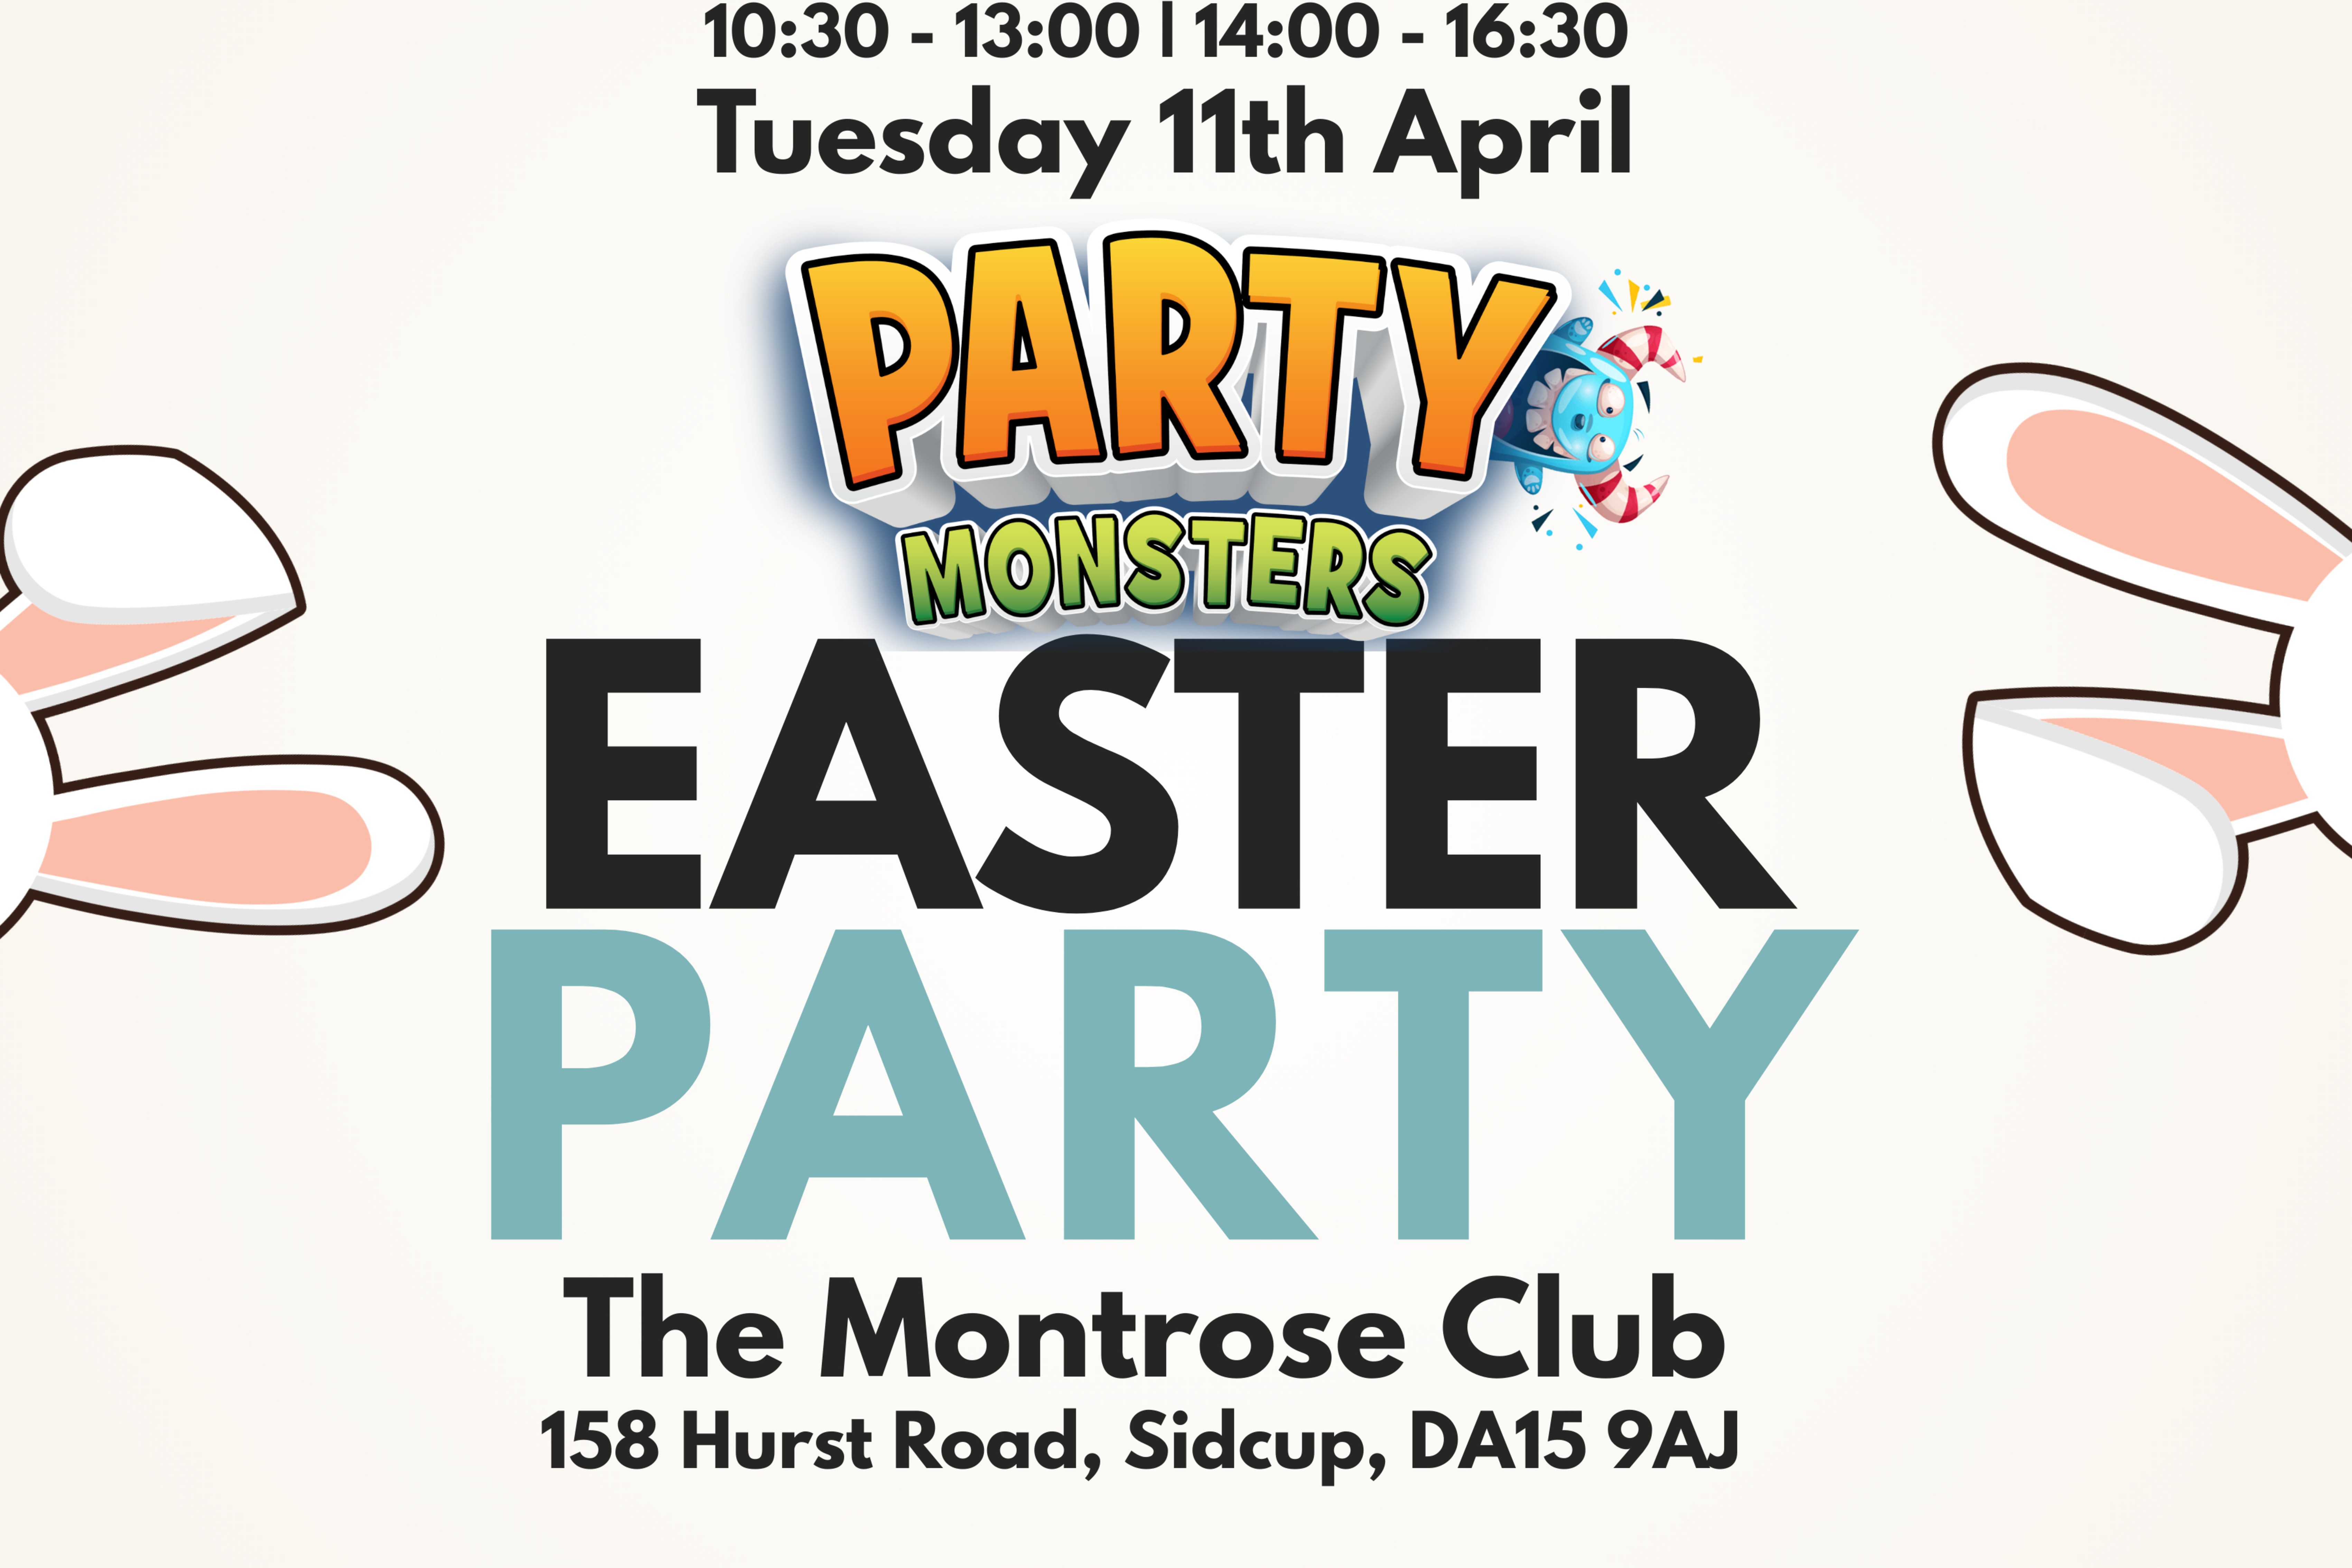 Party Monsters Easter Party At The Montrose Park Club